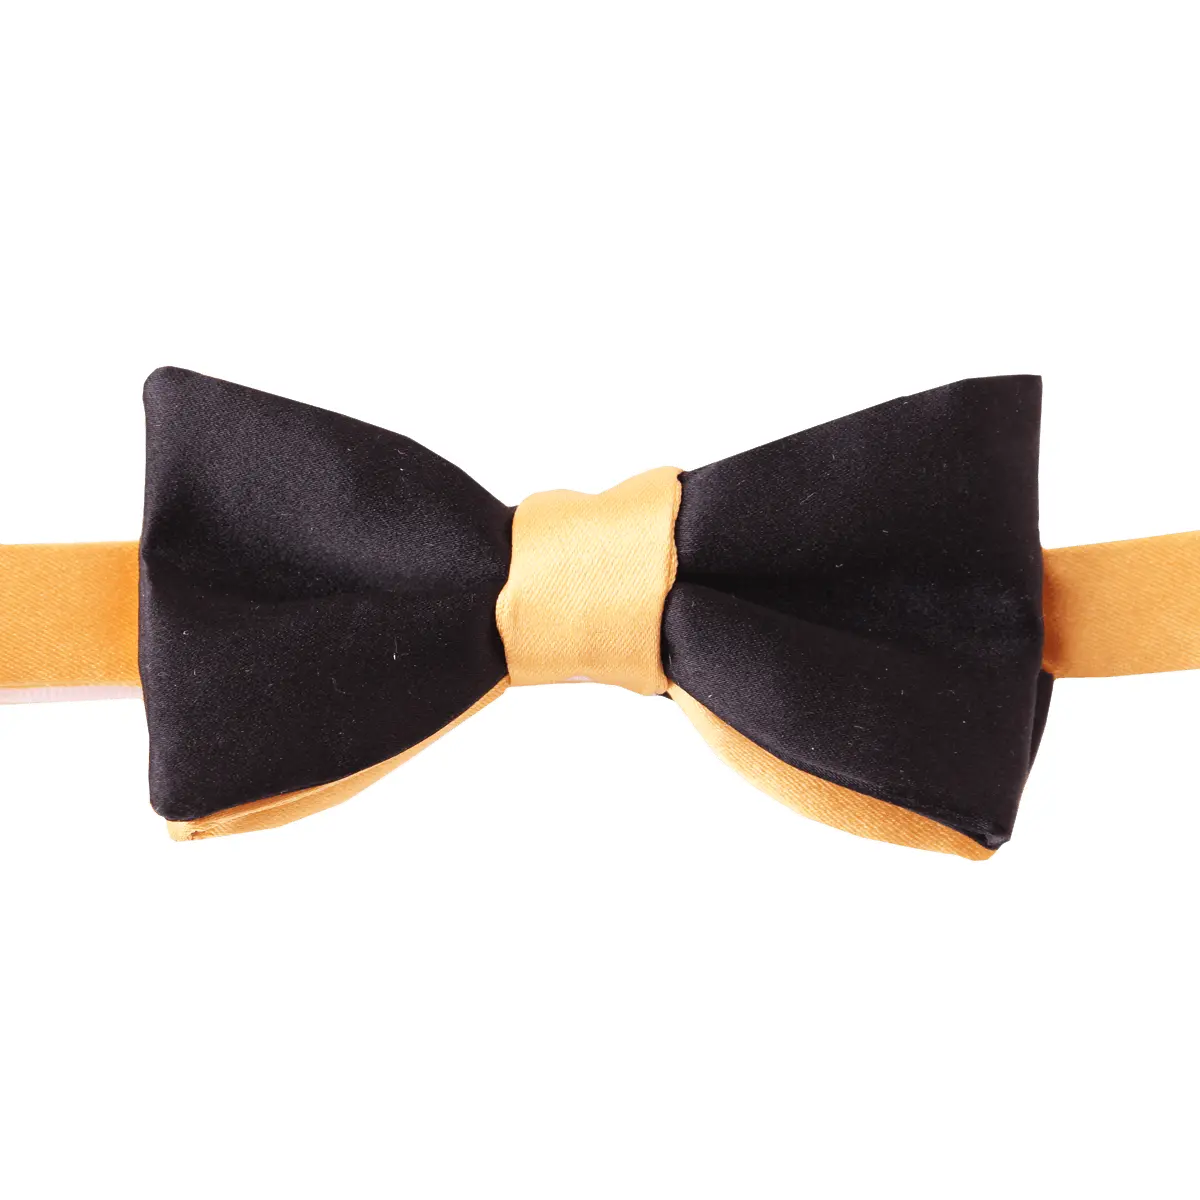 Silver & Black Two-Tone Bow Tie  Robert Old Gold - Black  